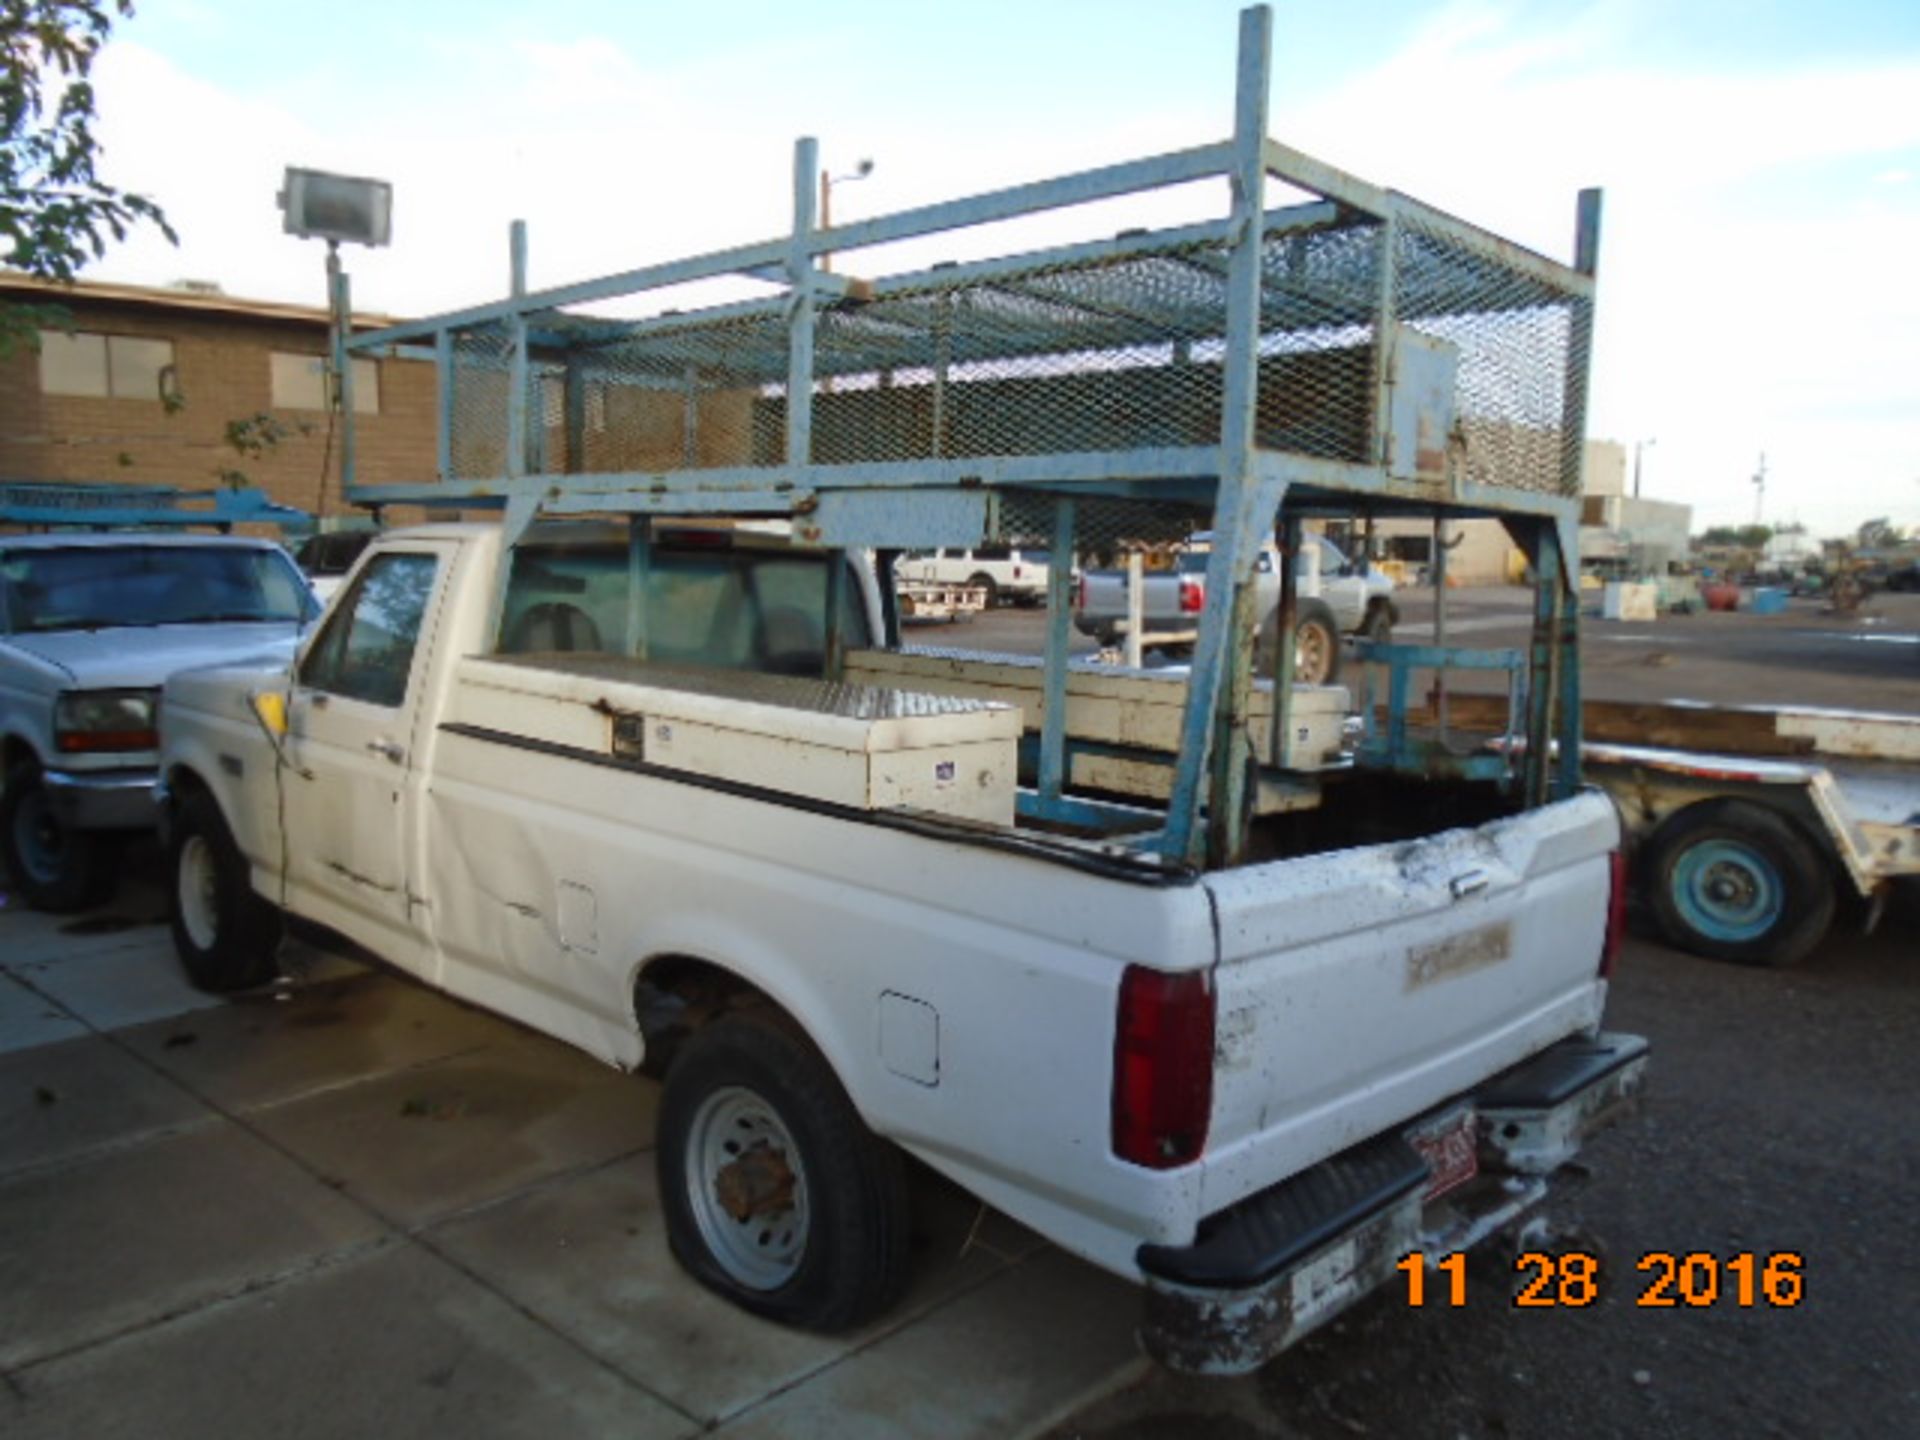 FORD F-250 VIN. 1FTHF25HXTLB61728 - Image 2 of 2